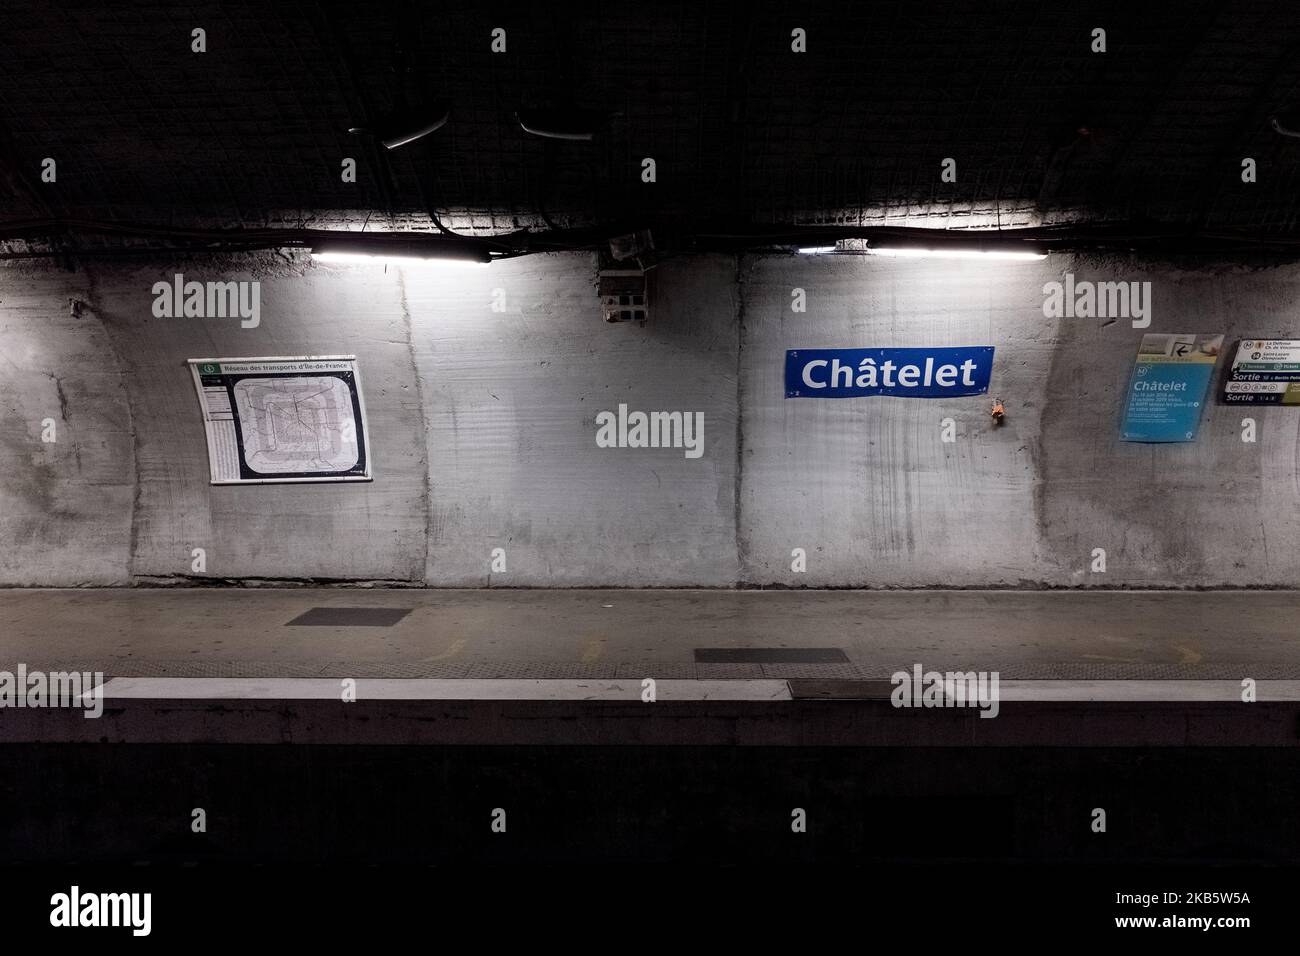 The platforms of the Chatelet station on metro line 4 are deserted after the closure to traffic in the middle of the morning on Friday, September 13, 2019, when all the unions of RATP, the Parisian transport authority that operates the capital's metro lines, began a strike to protest against the reform of pension schemes and the end of their special schemes. Most of the metro lines in Paris were disrupted, including 10 completely closed metro lines. Parisians anticipated the strike by limiting their travel as much as possible and by taking a day off or dealing with telework. In fact, the trans Stock Photo